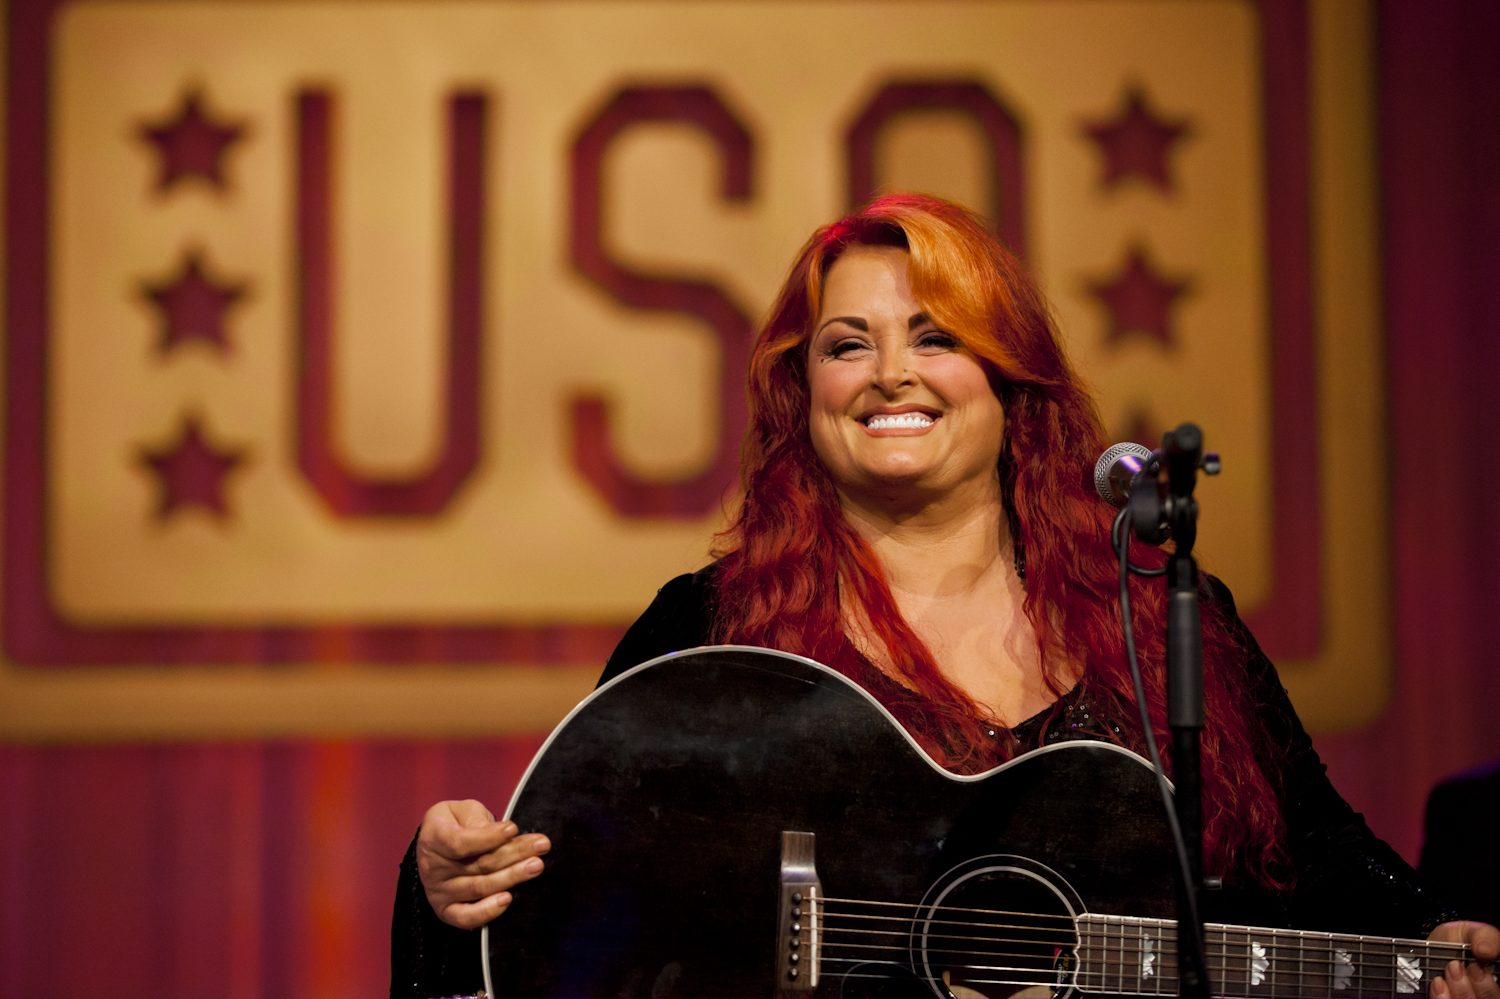 Wynonna Judd holds a guitar and performs a song.